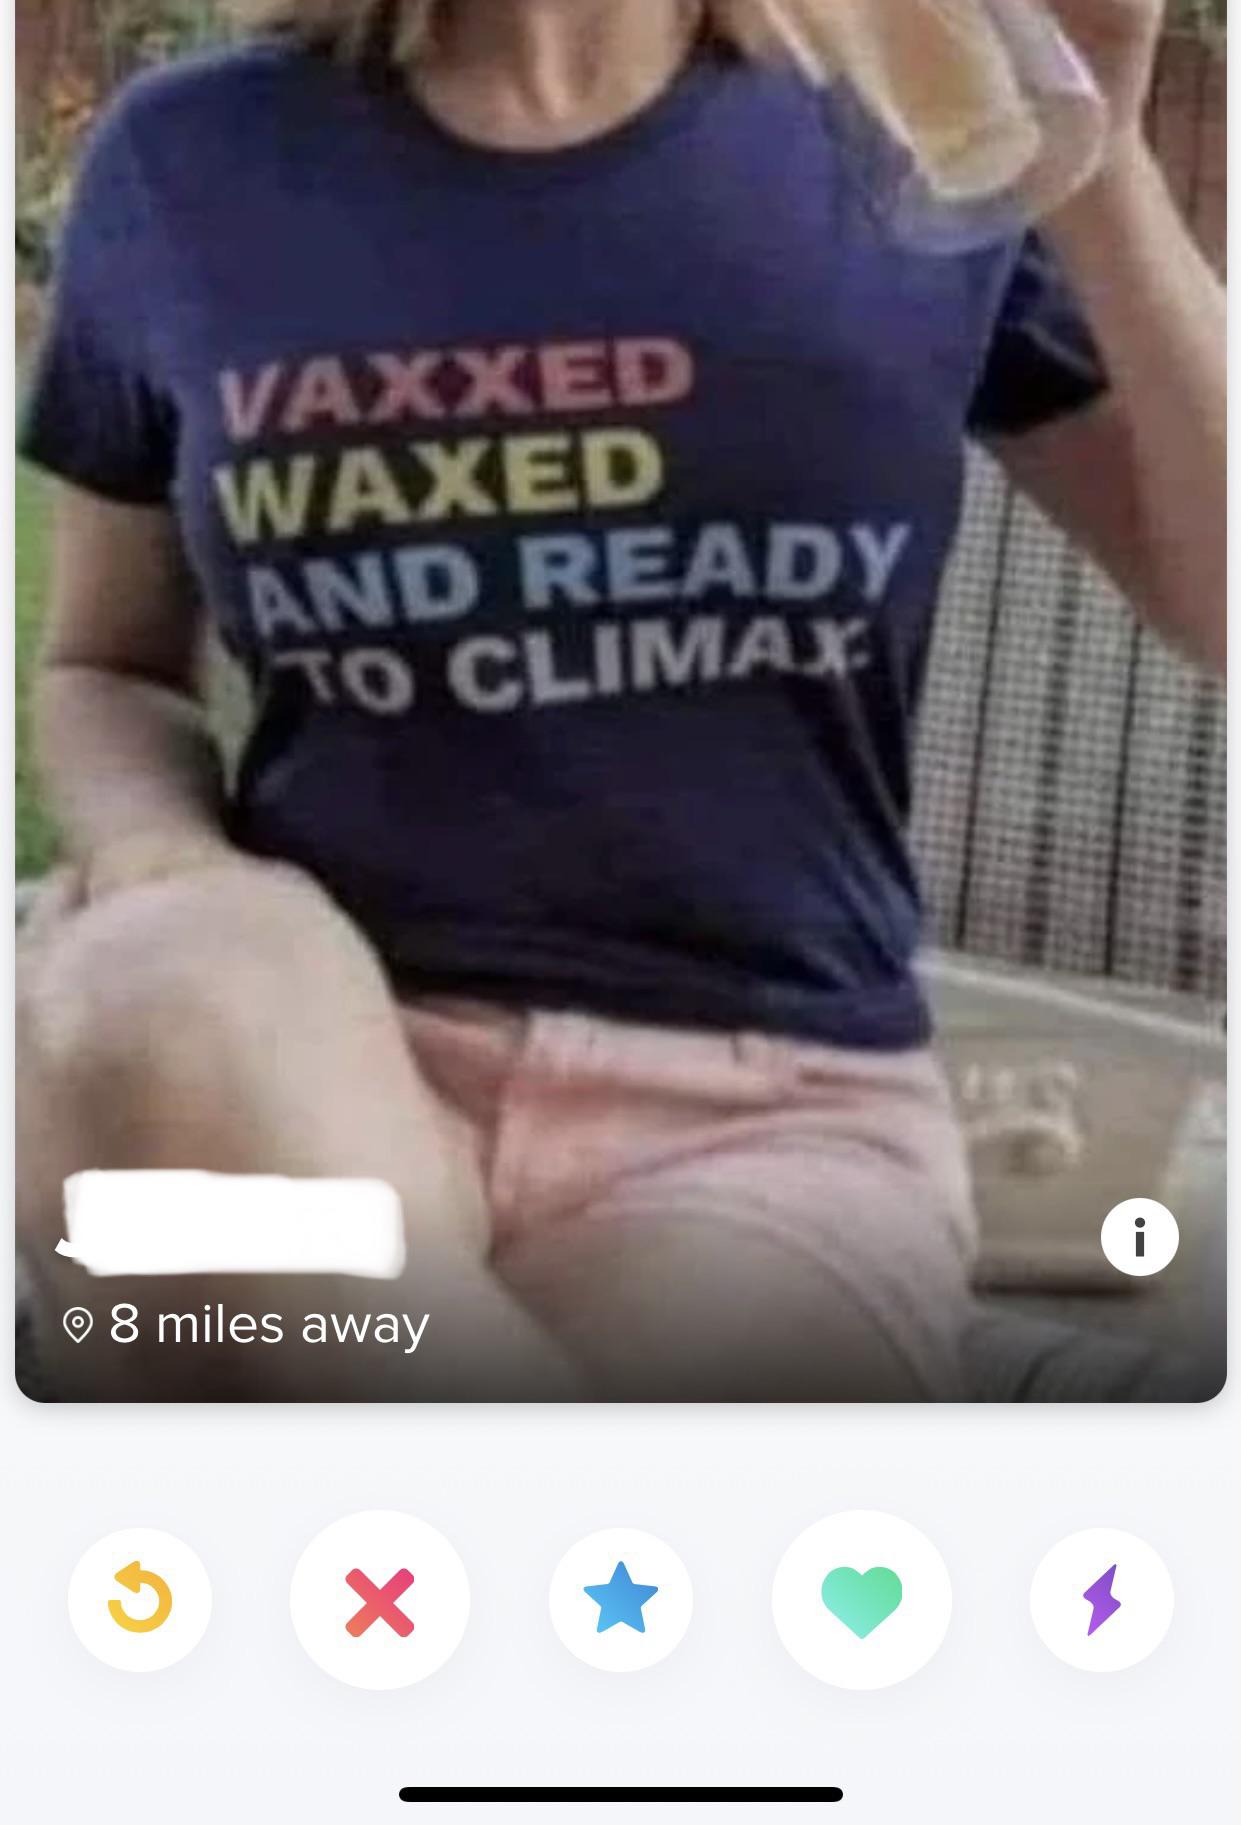 vaxxed waxed and ready to climax t shirt - Vaxxed Waxed And Ready To Climax i 8 miles away 5 X